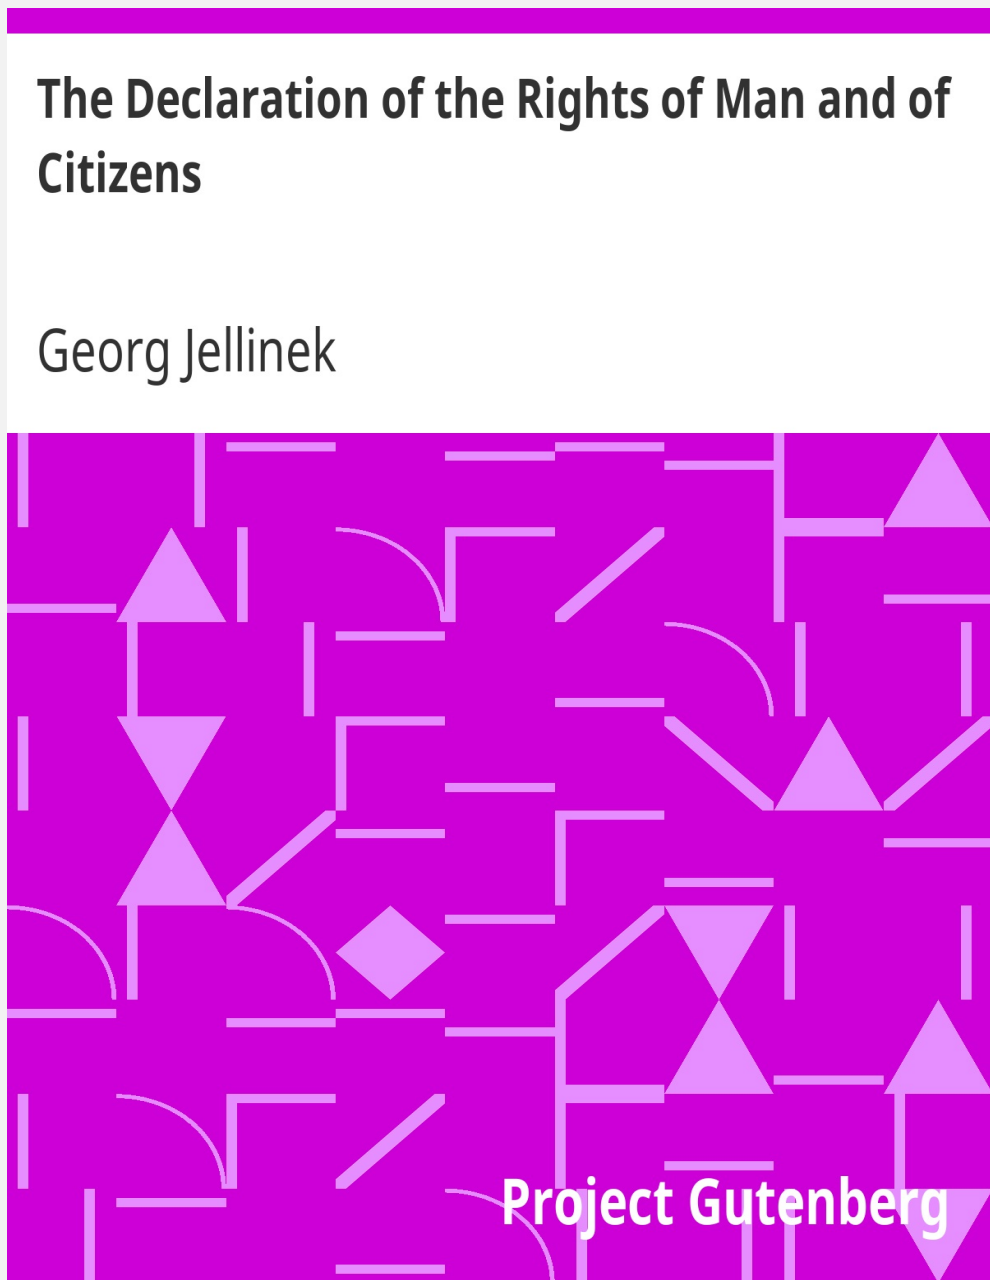 THE DECLARATION OF THE RIGHTS OF MAN AND OF CITIZENS BY GEORG JELLINEK PDF